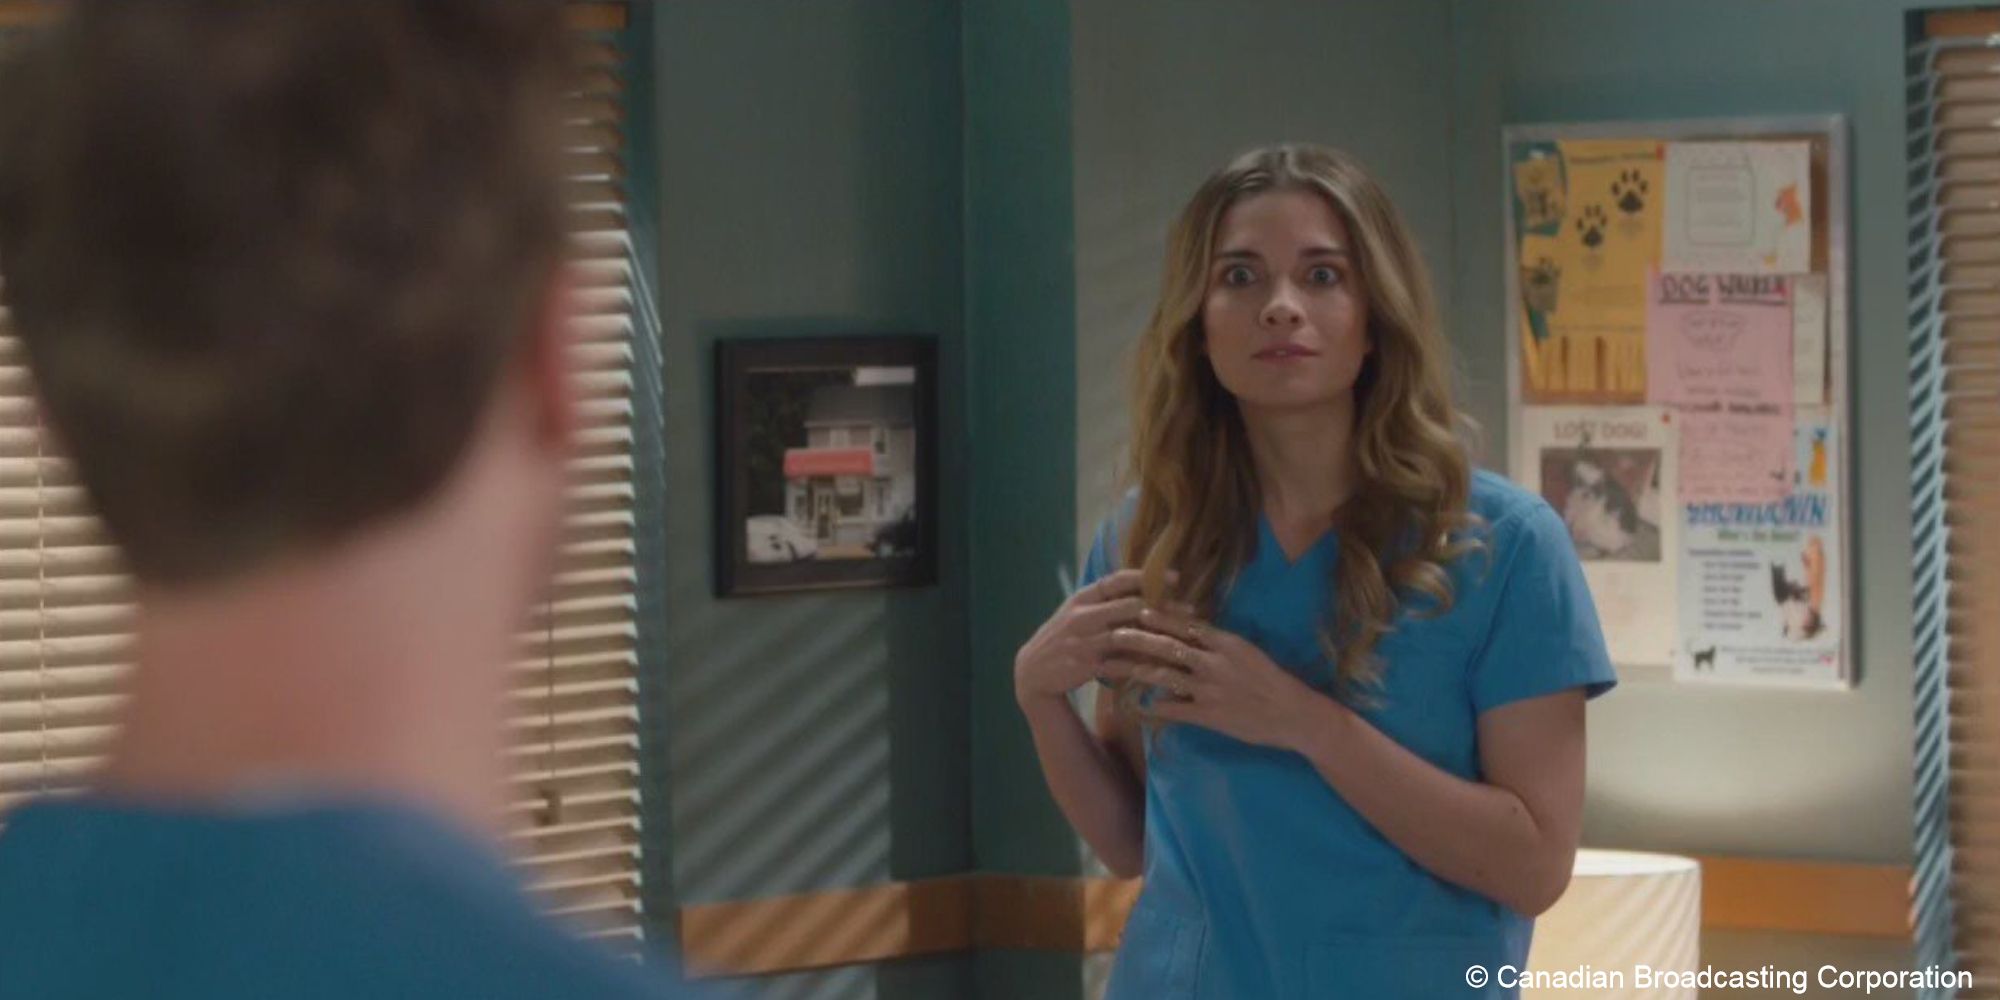 Alexis stands in scrubs, twirling her hair as she looks at Ted whose back is to the camera